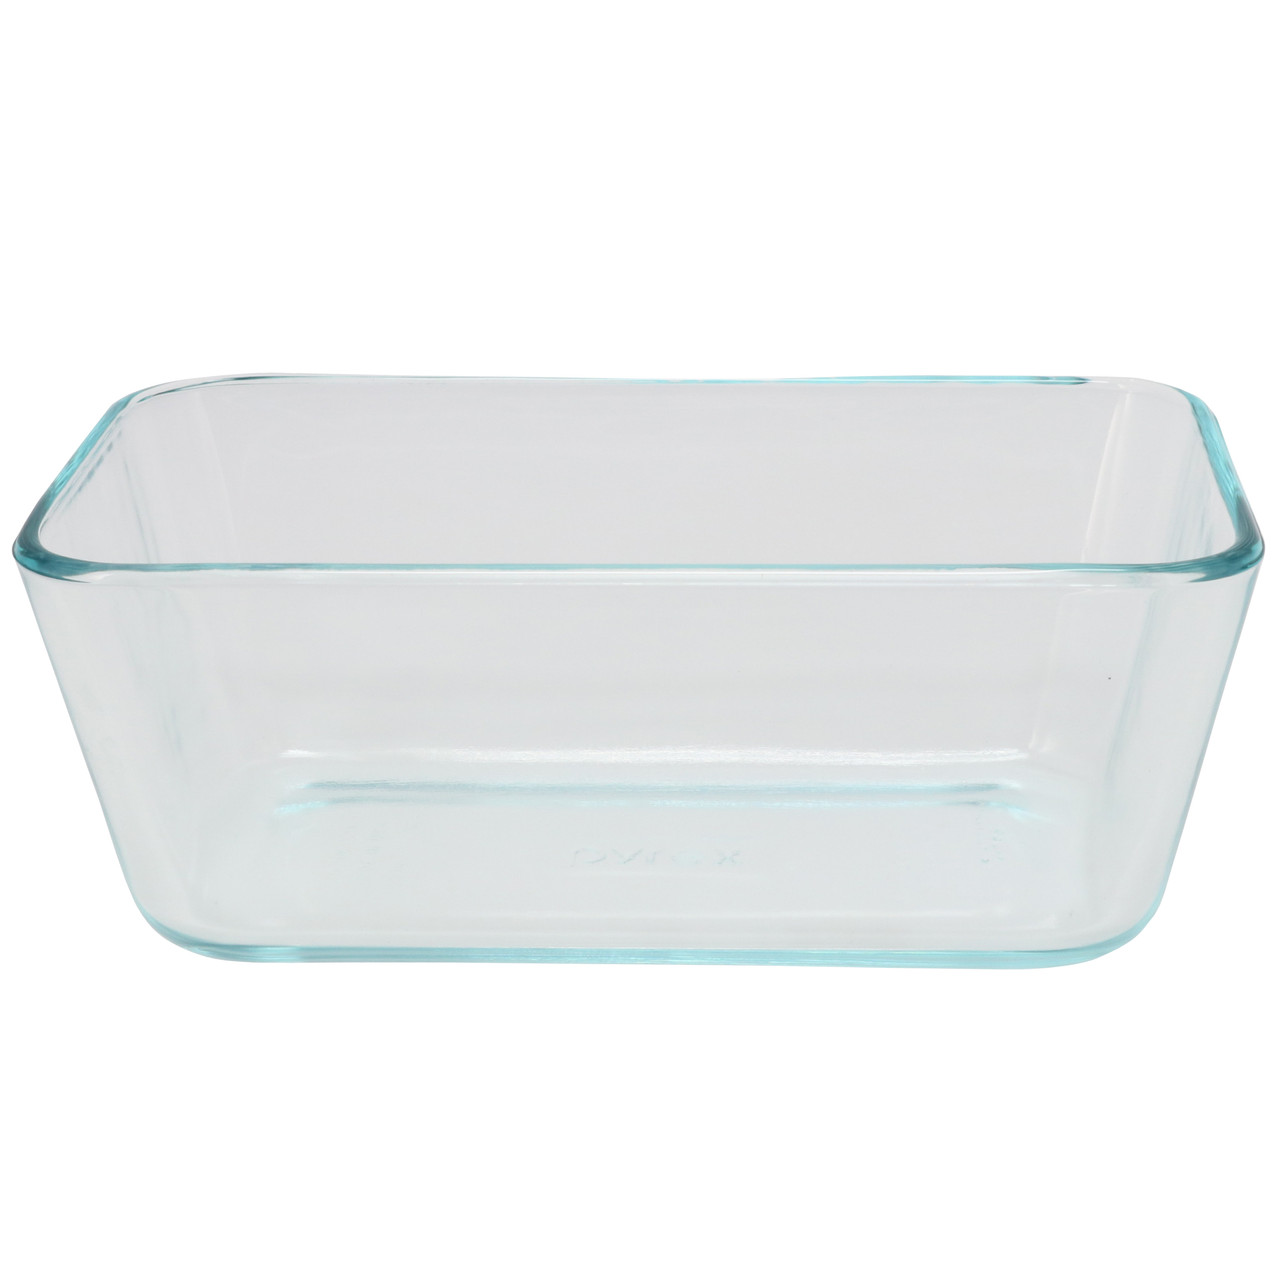 Airclip 750ml Square Glass Food Storage